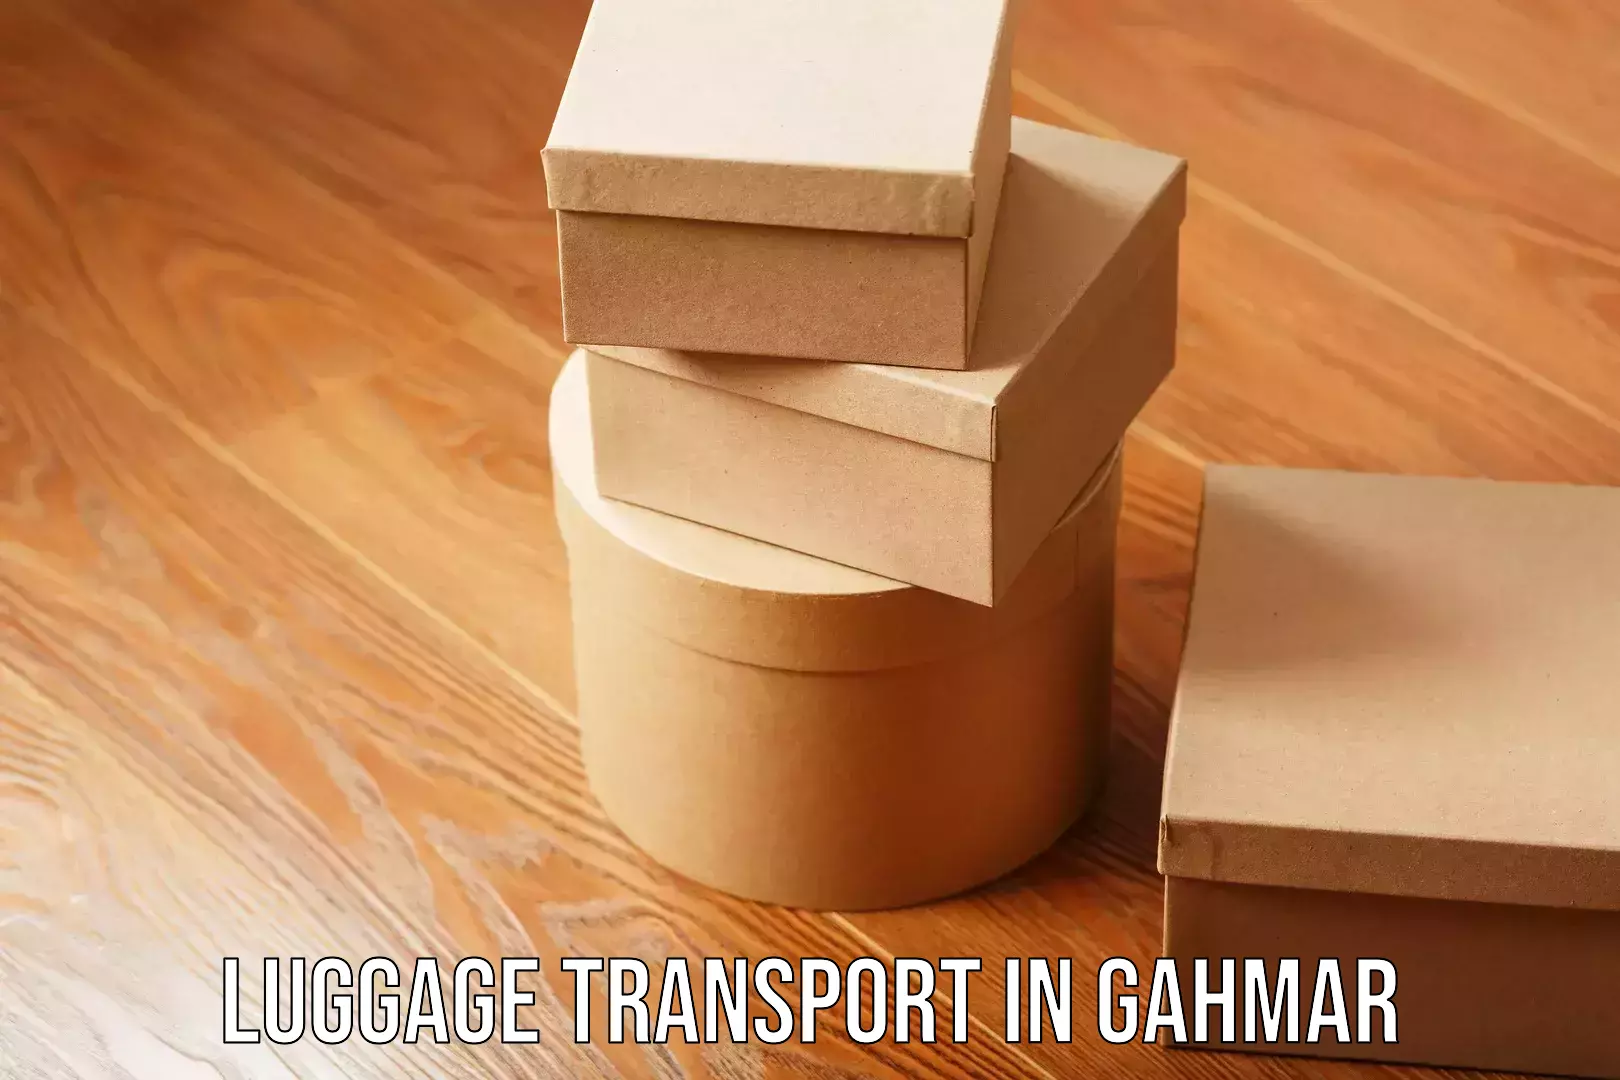 Luggage storage and delivery in Gahmar